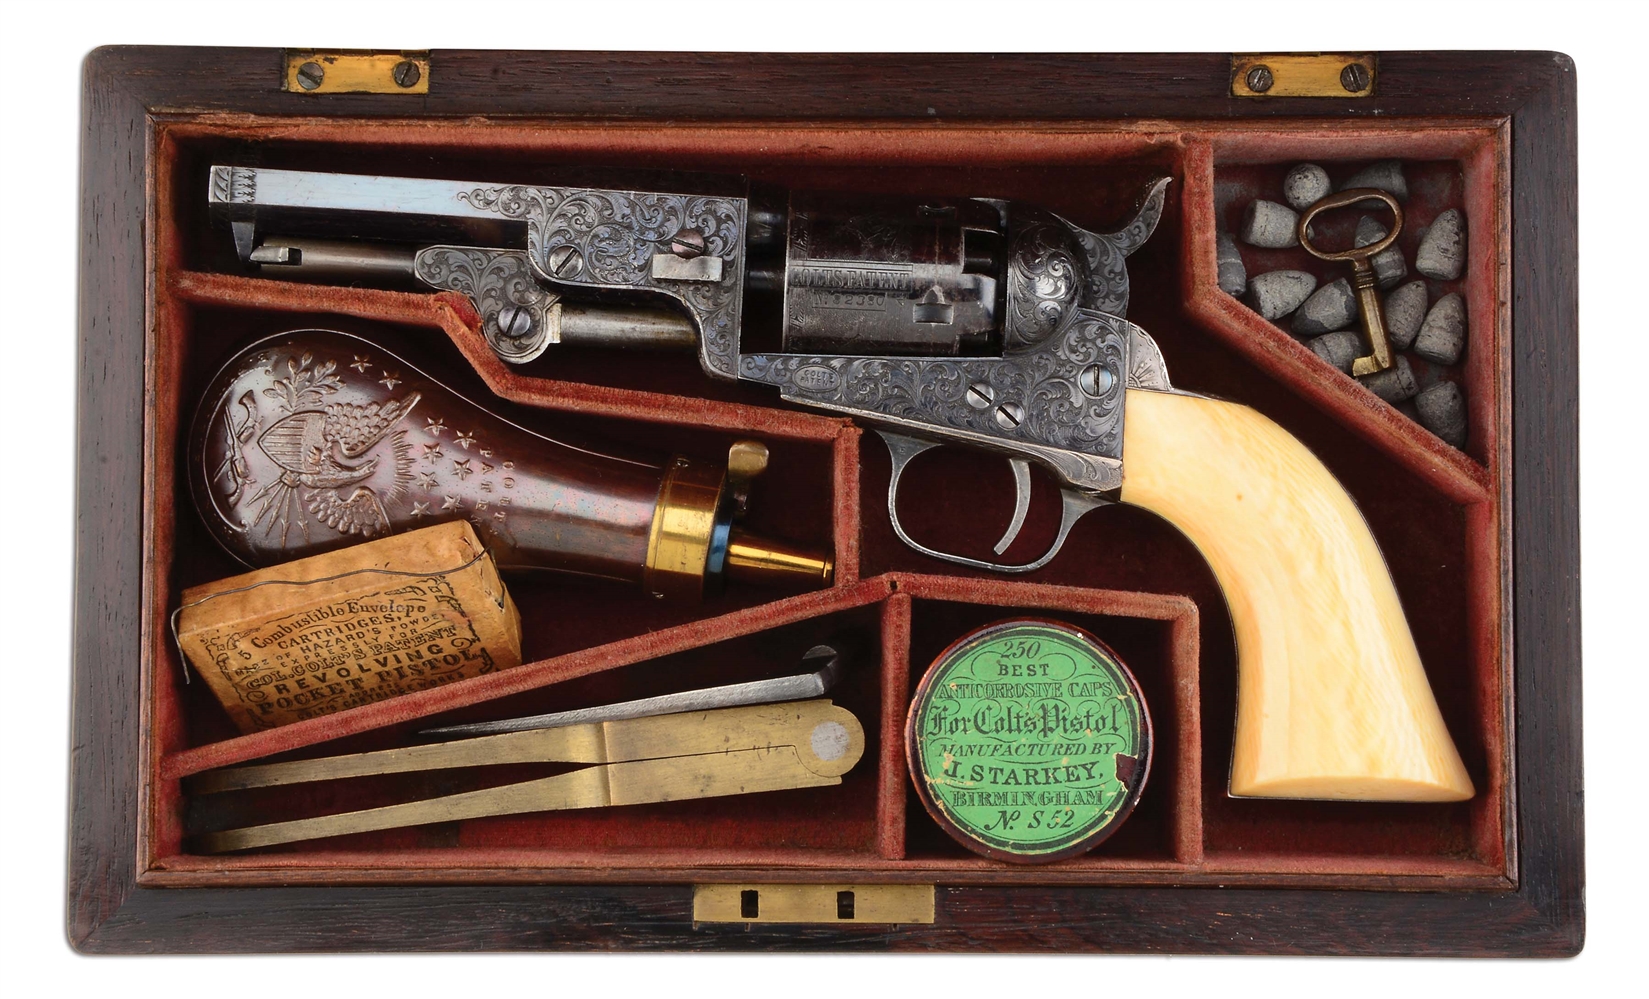 (A) FINE RARE DELUXE CASED & FACTORY ENGRAVED COLT 1849 POCKET REVOLVER 4" BARREL WITH ORIGINAL IVORY GRIPS (1853).